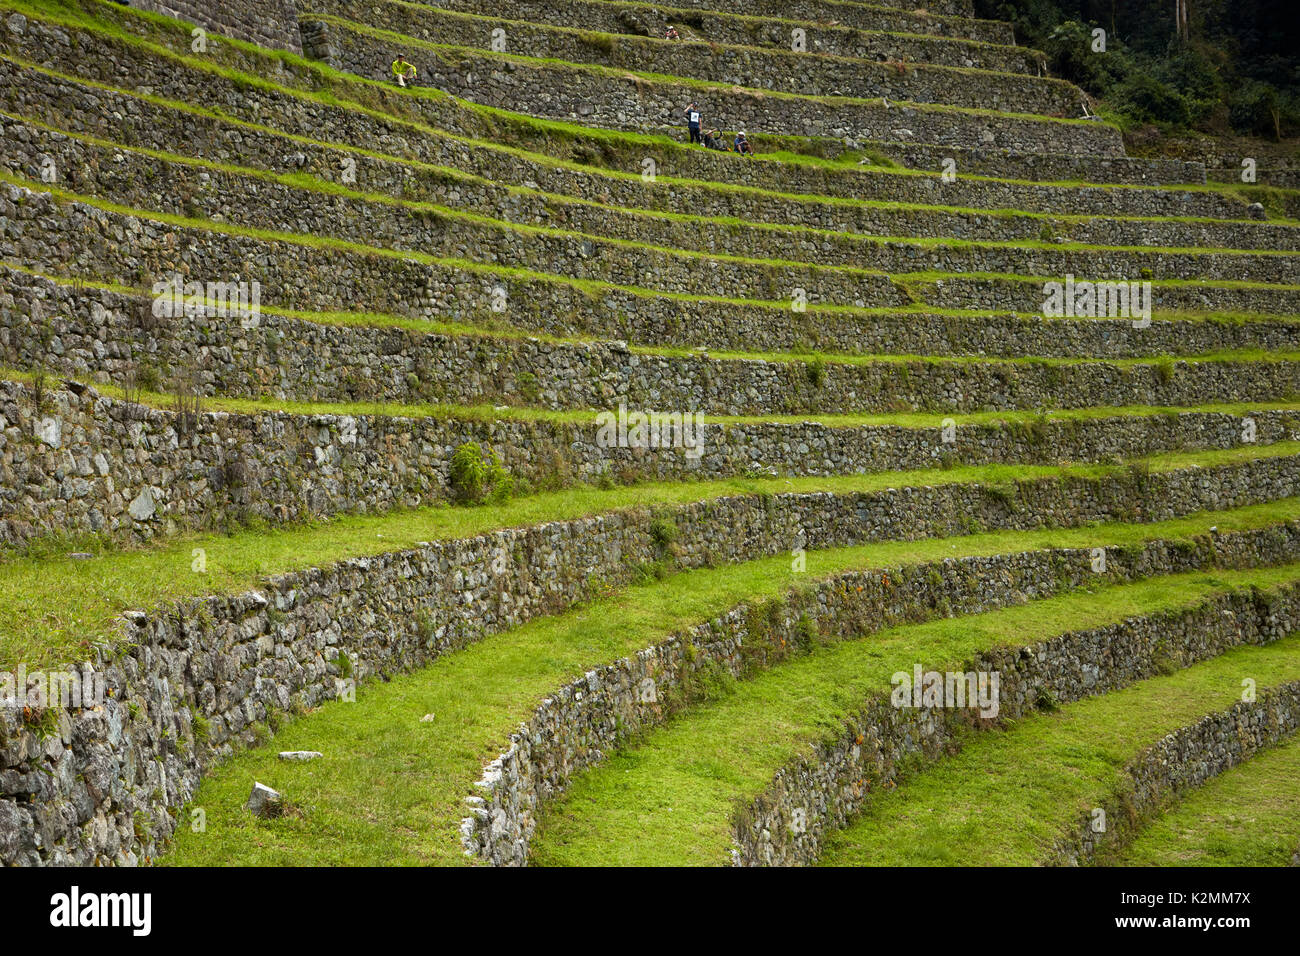 Agricultural terraces at the Inca city of Winay Wayna, on the Inca Trail to Machu Picchu, Peru, South America Stock Photo